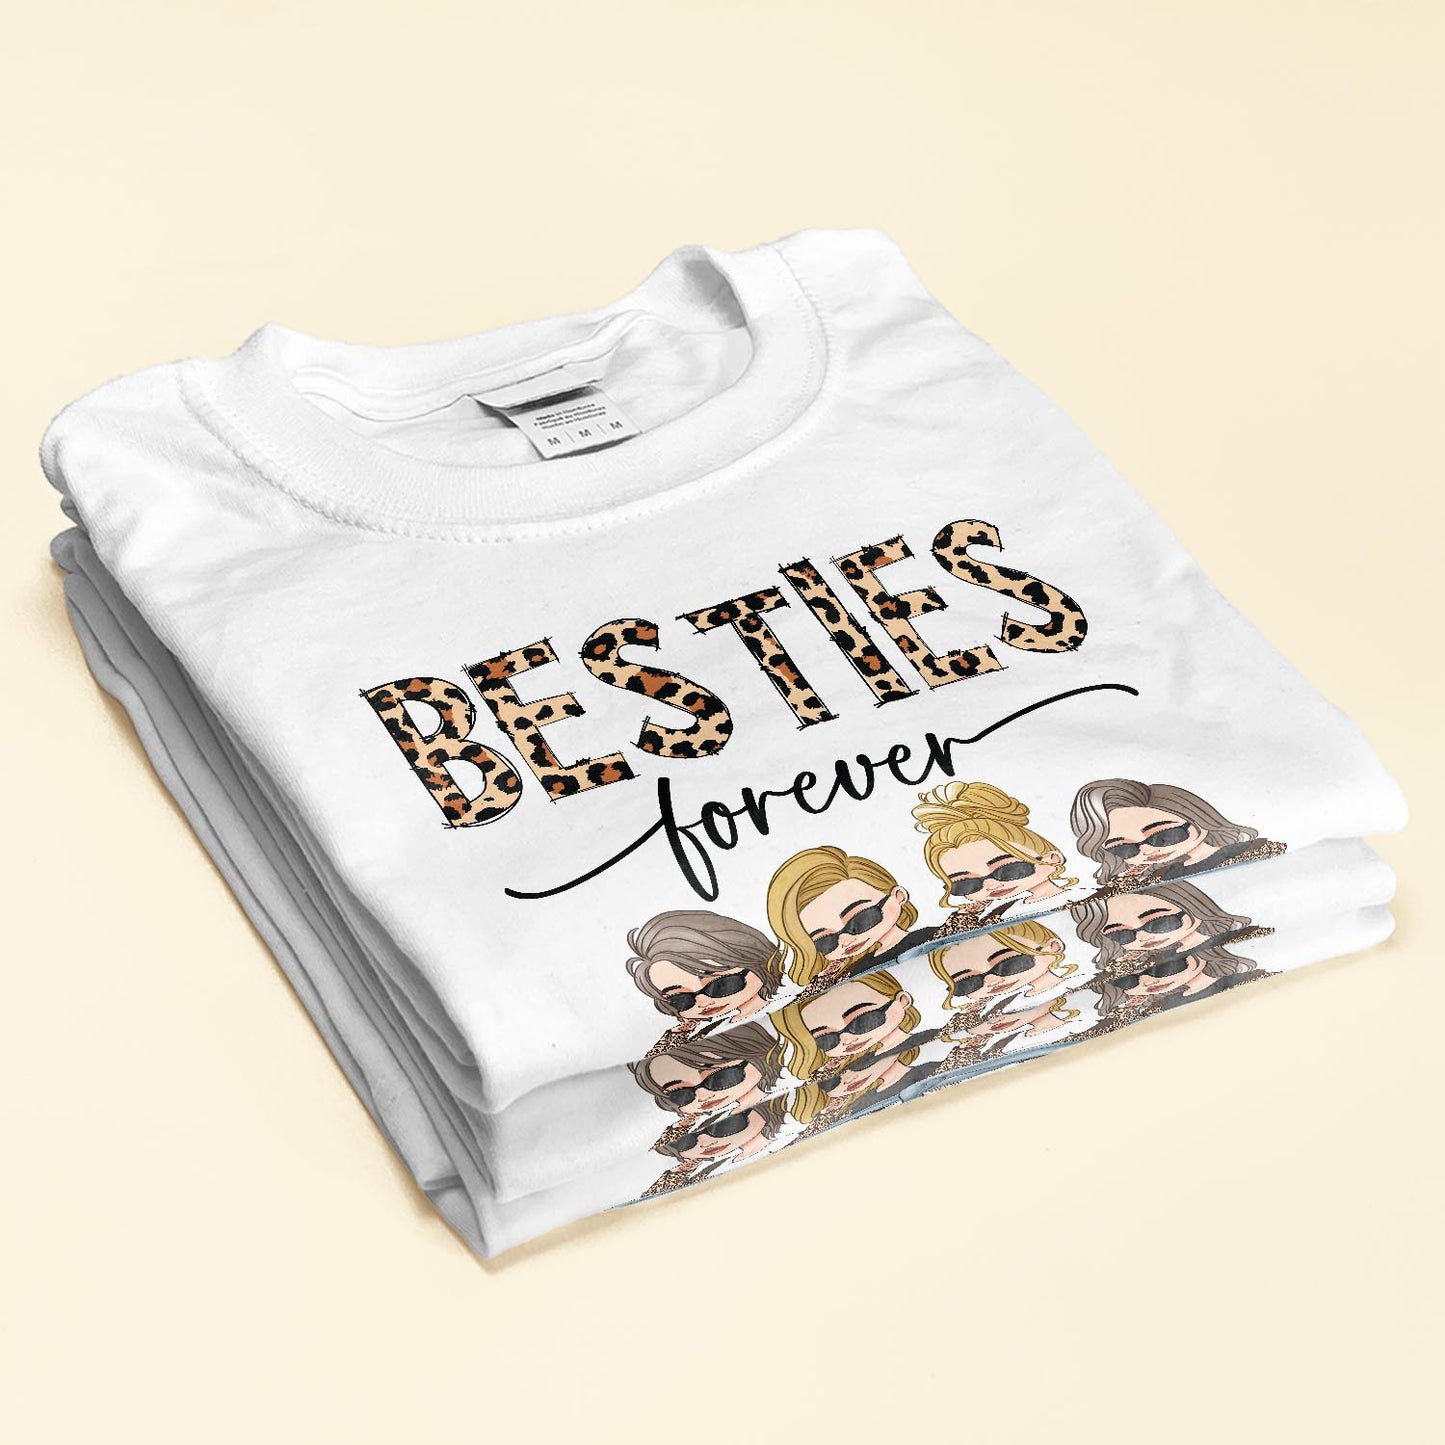 Besties Forever - Personalized Shirt - Birthday Gift For Besties, BFF, Sisters, Sistas, Co-workers - Sassy Girls